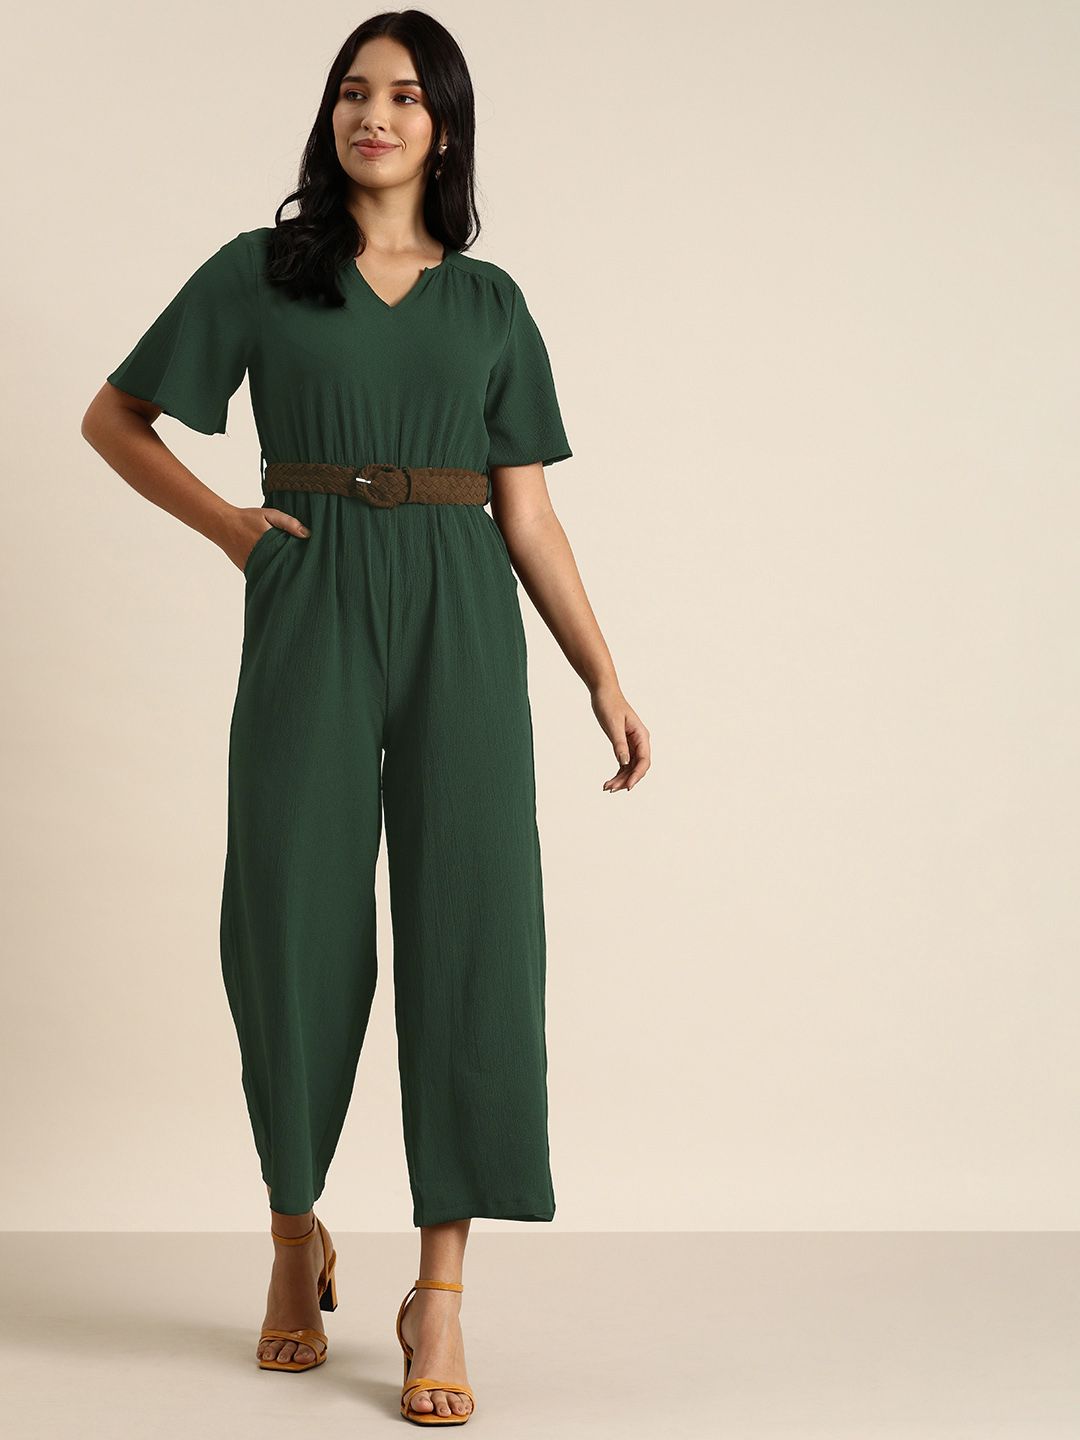 all about you Teal Green Solid Basic Jumpsuit Price in India